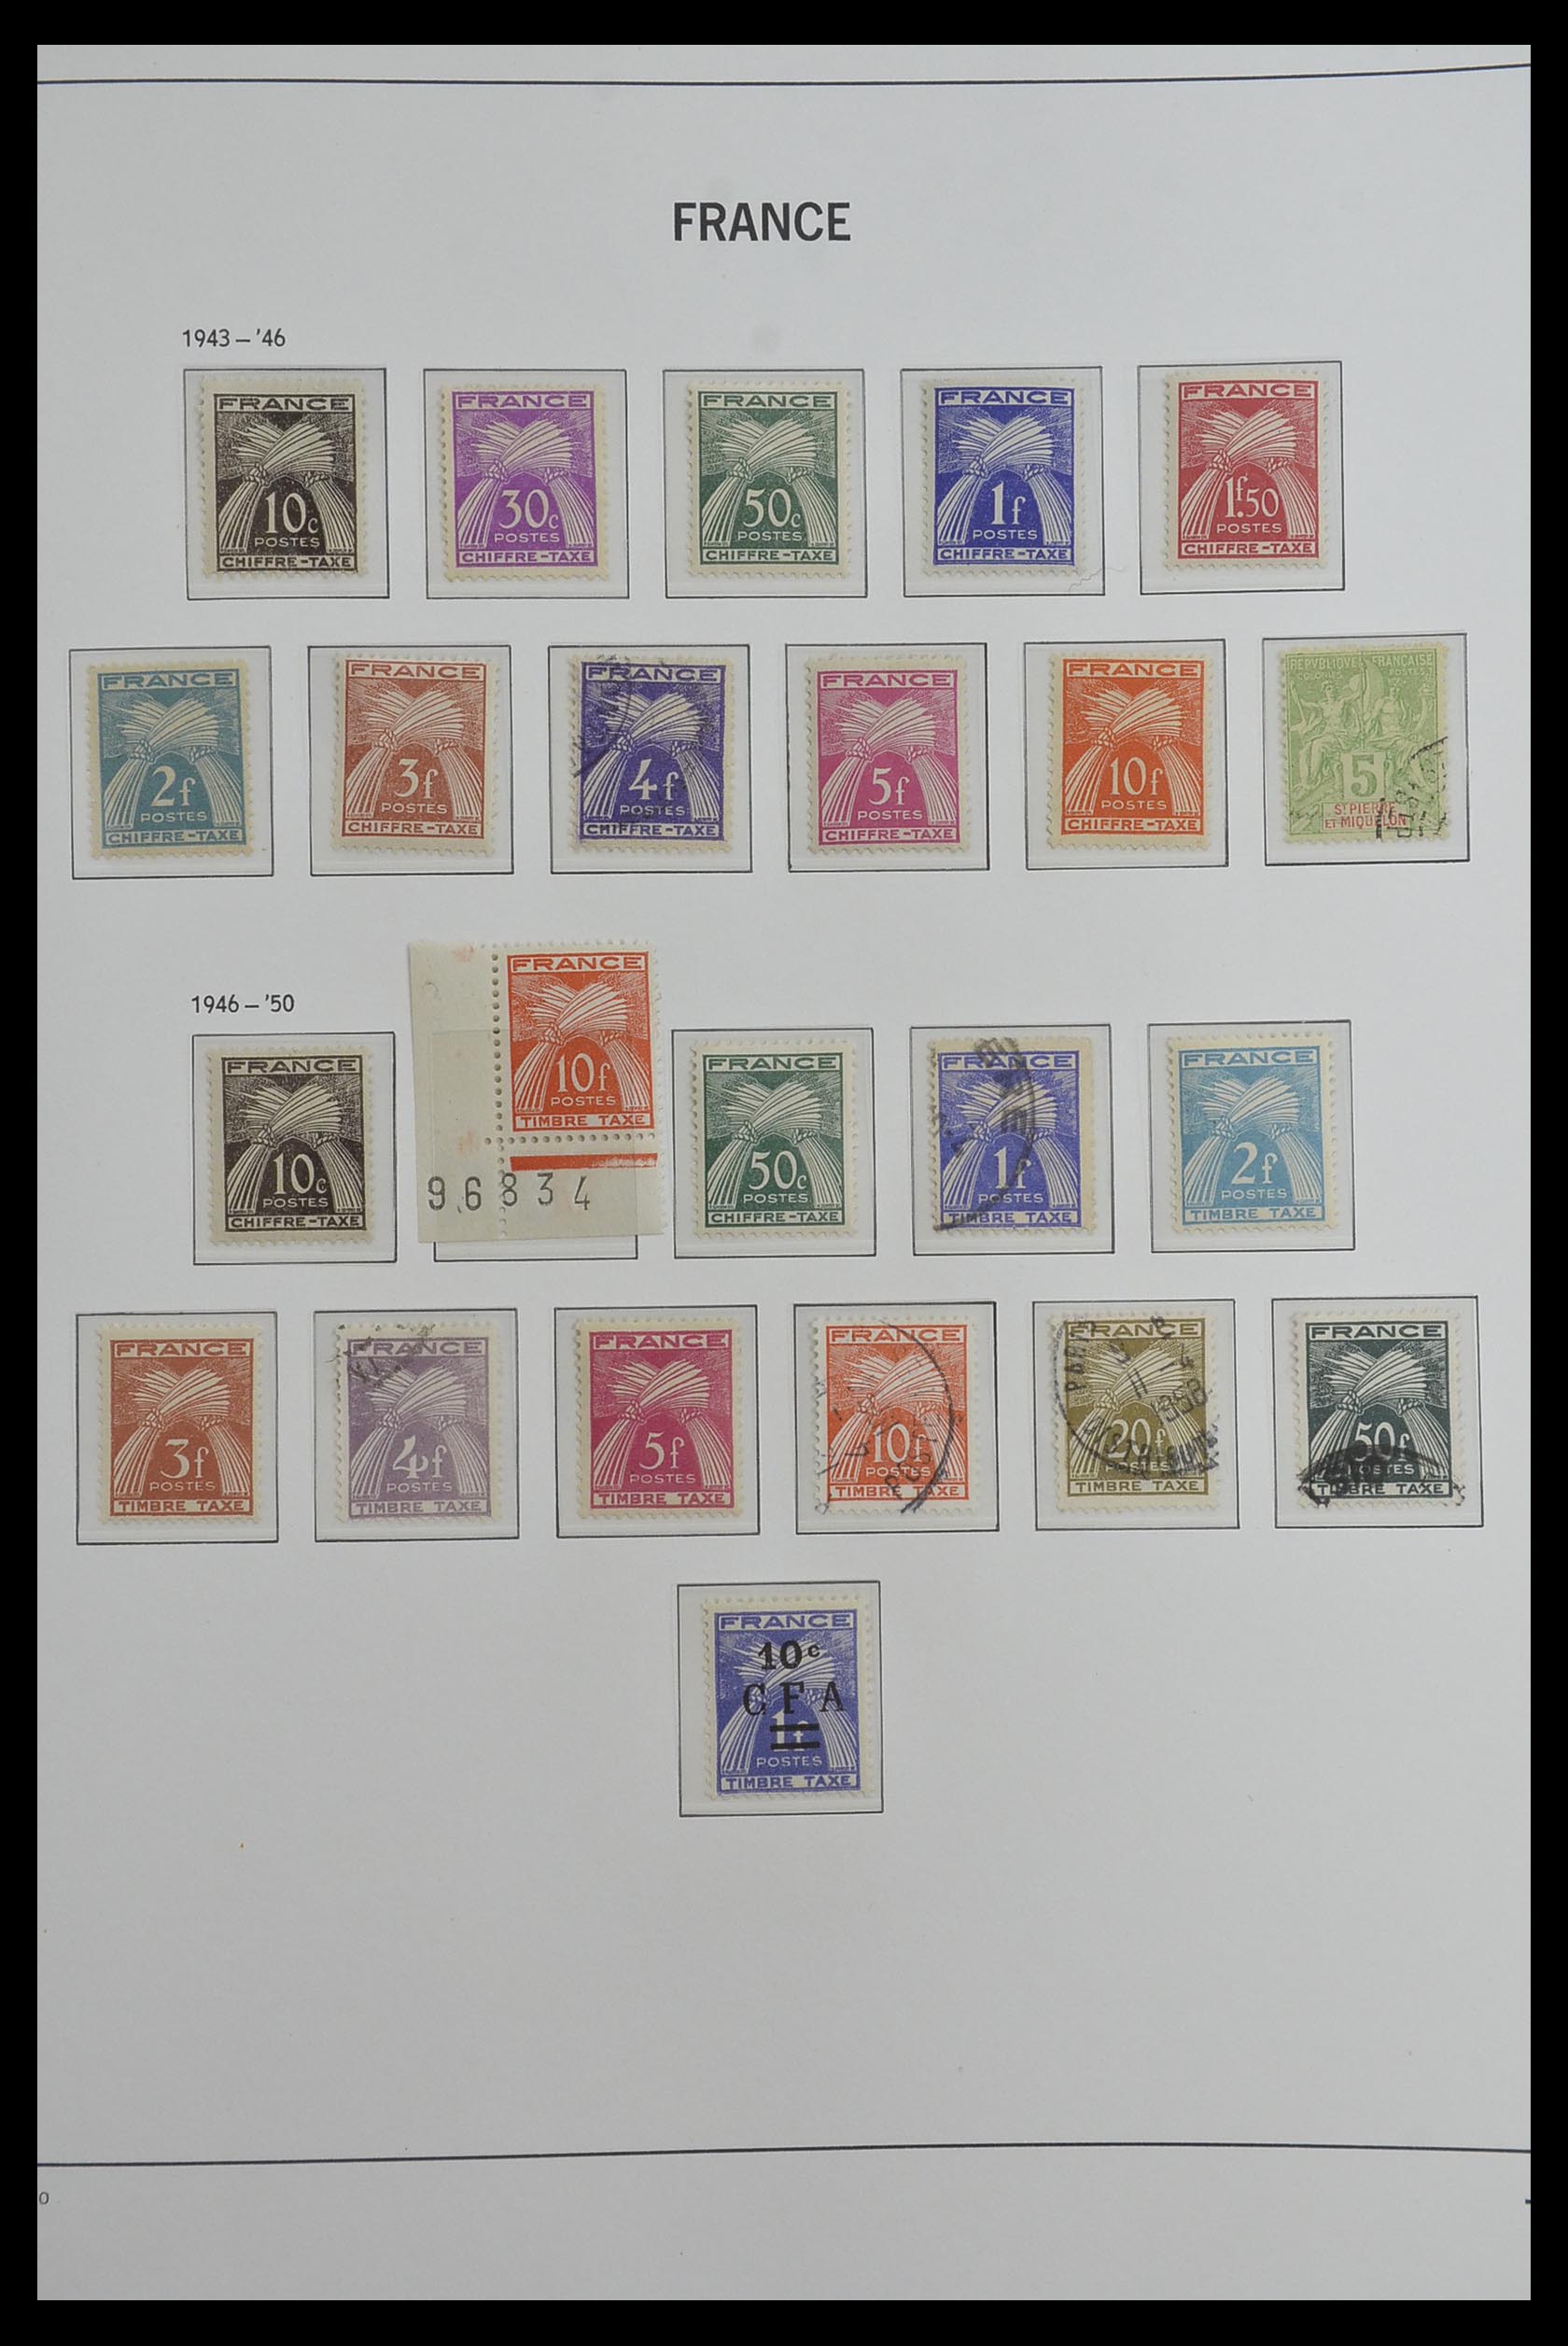 33480 064 - Stamp collection 33480 France 1849-1993.